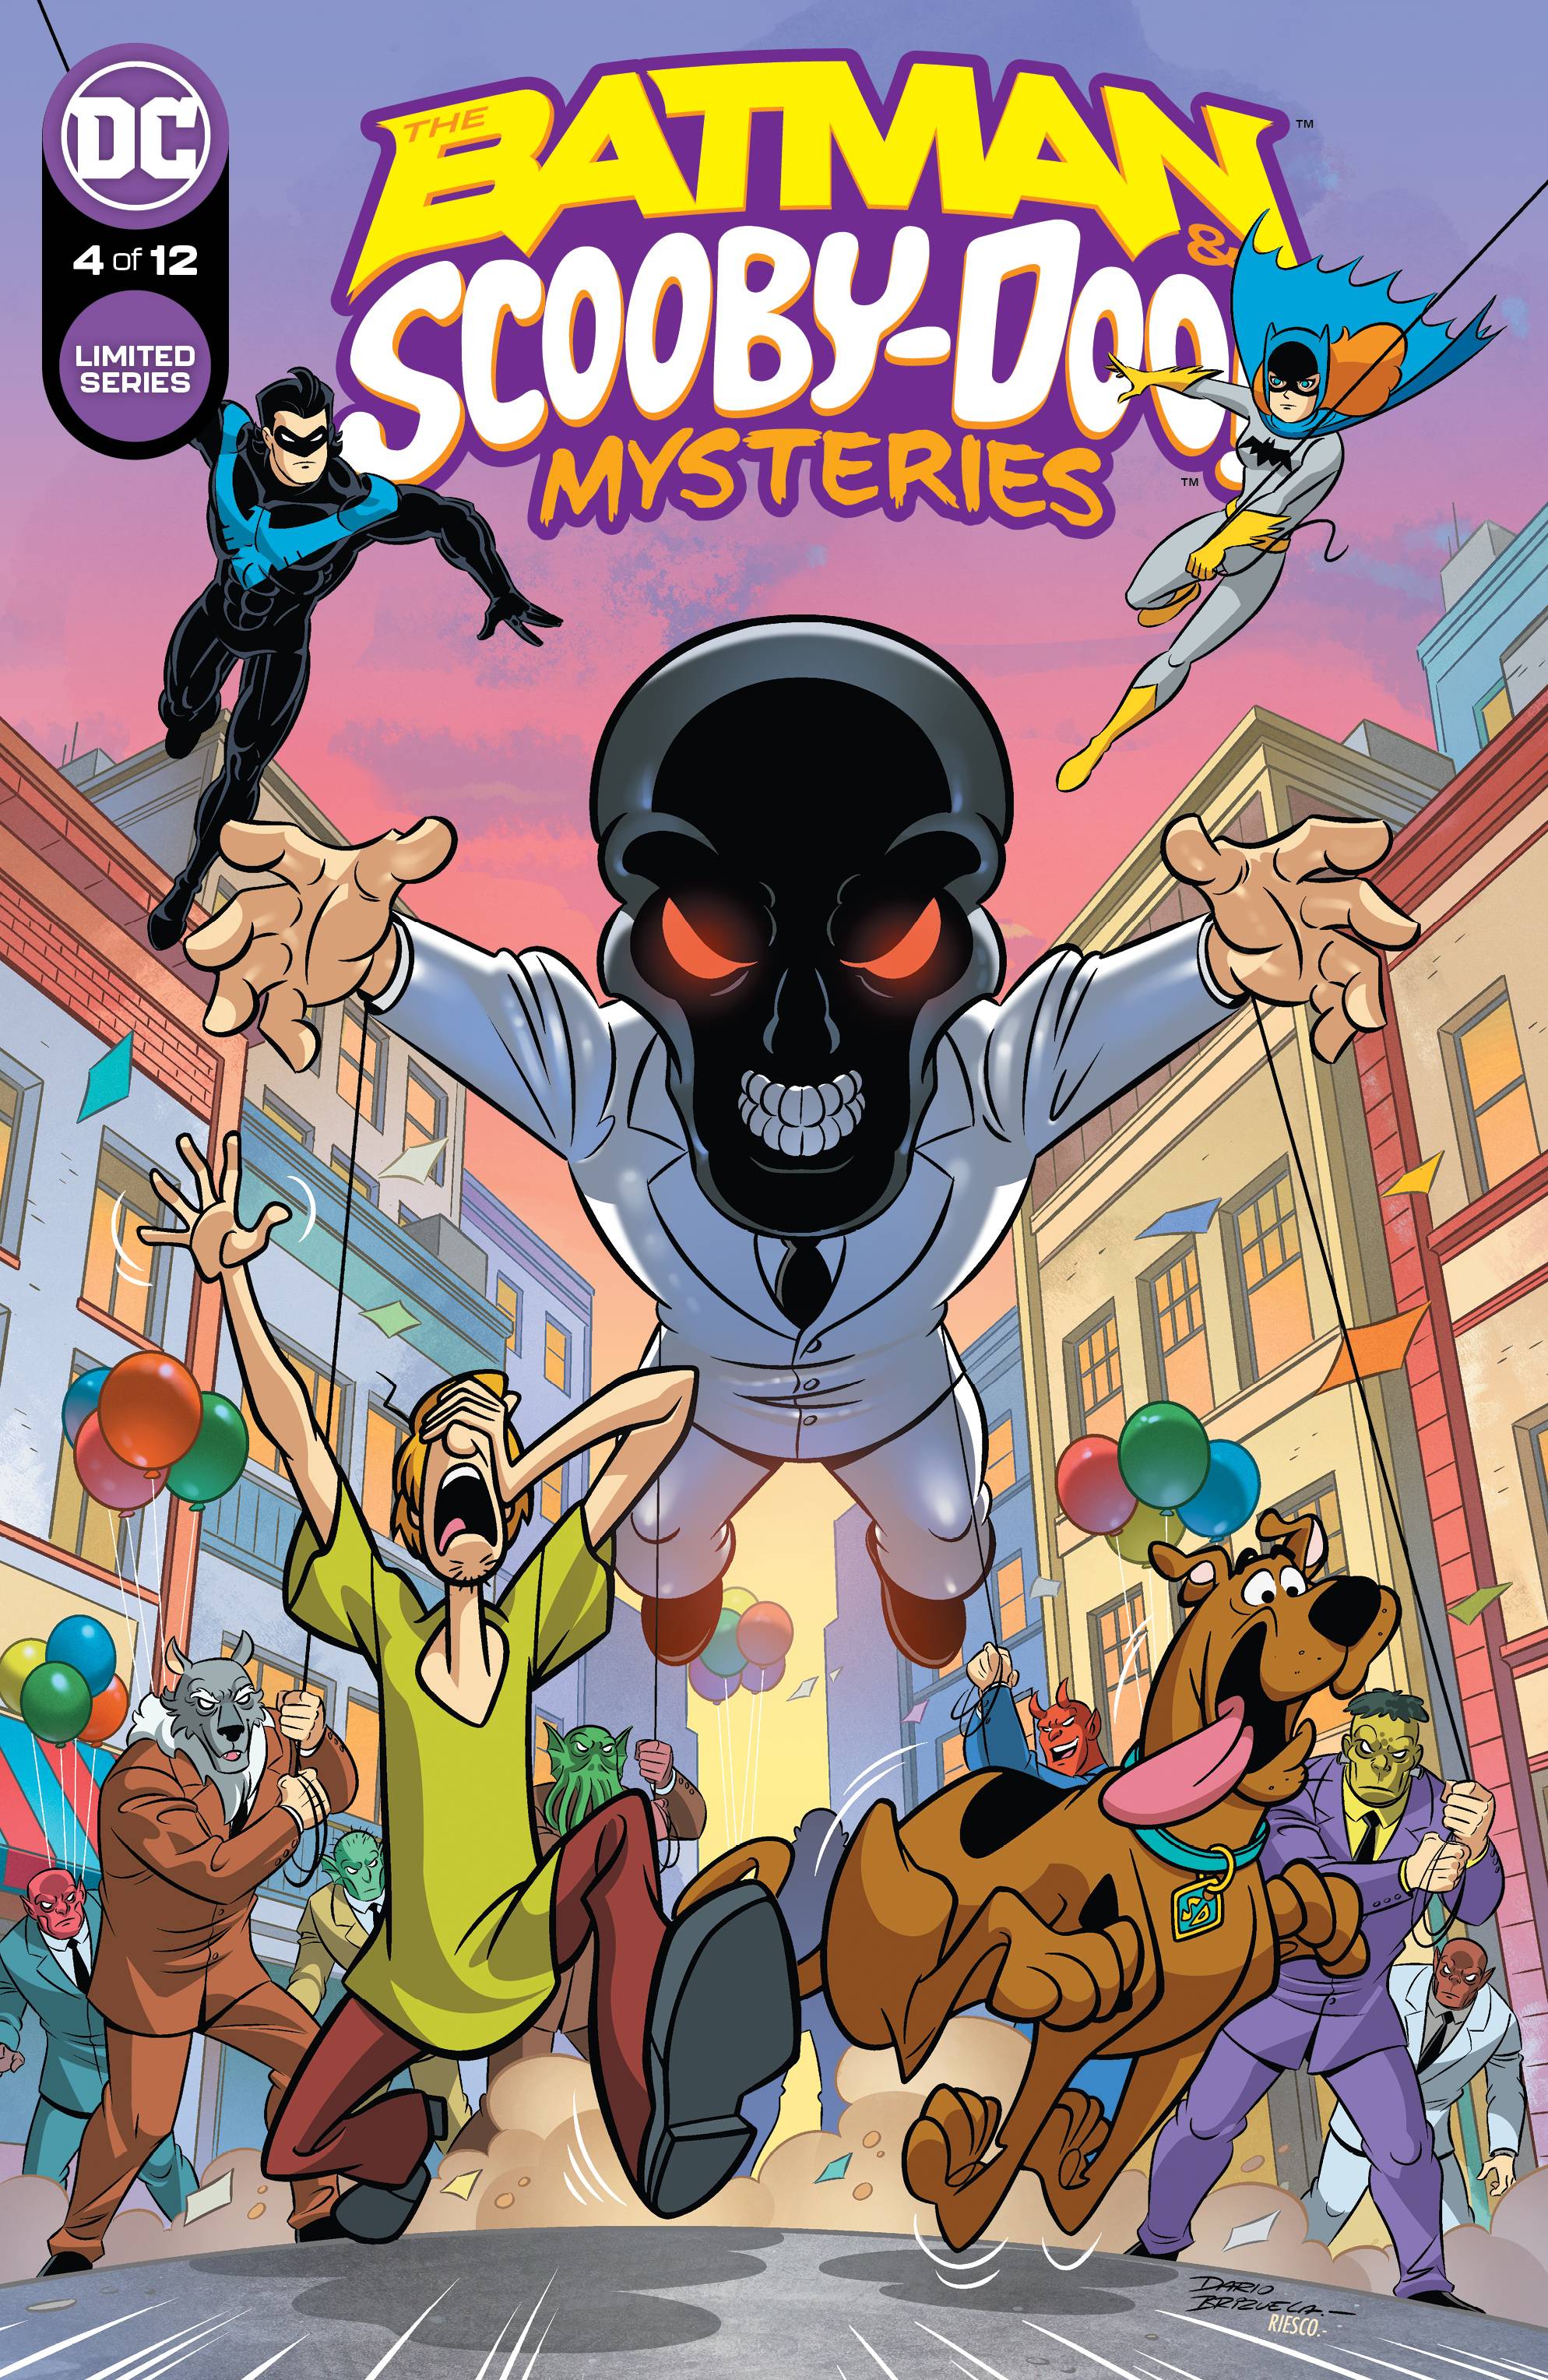 BATMAN & SCOOBY DOO MYSTERIES #4 | Game Master's Emporium (The New GME)